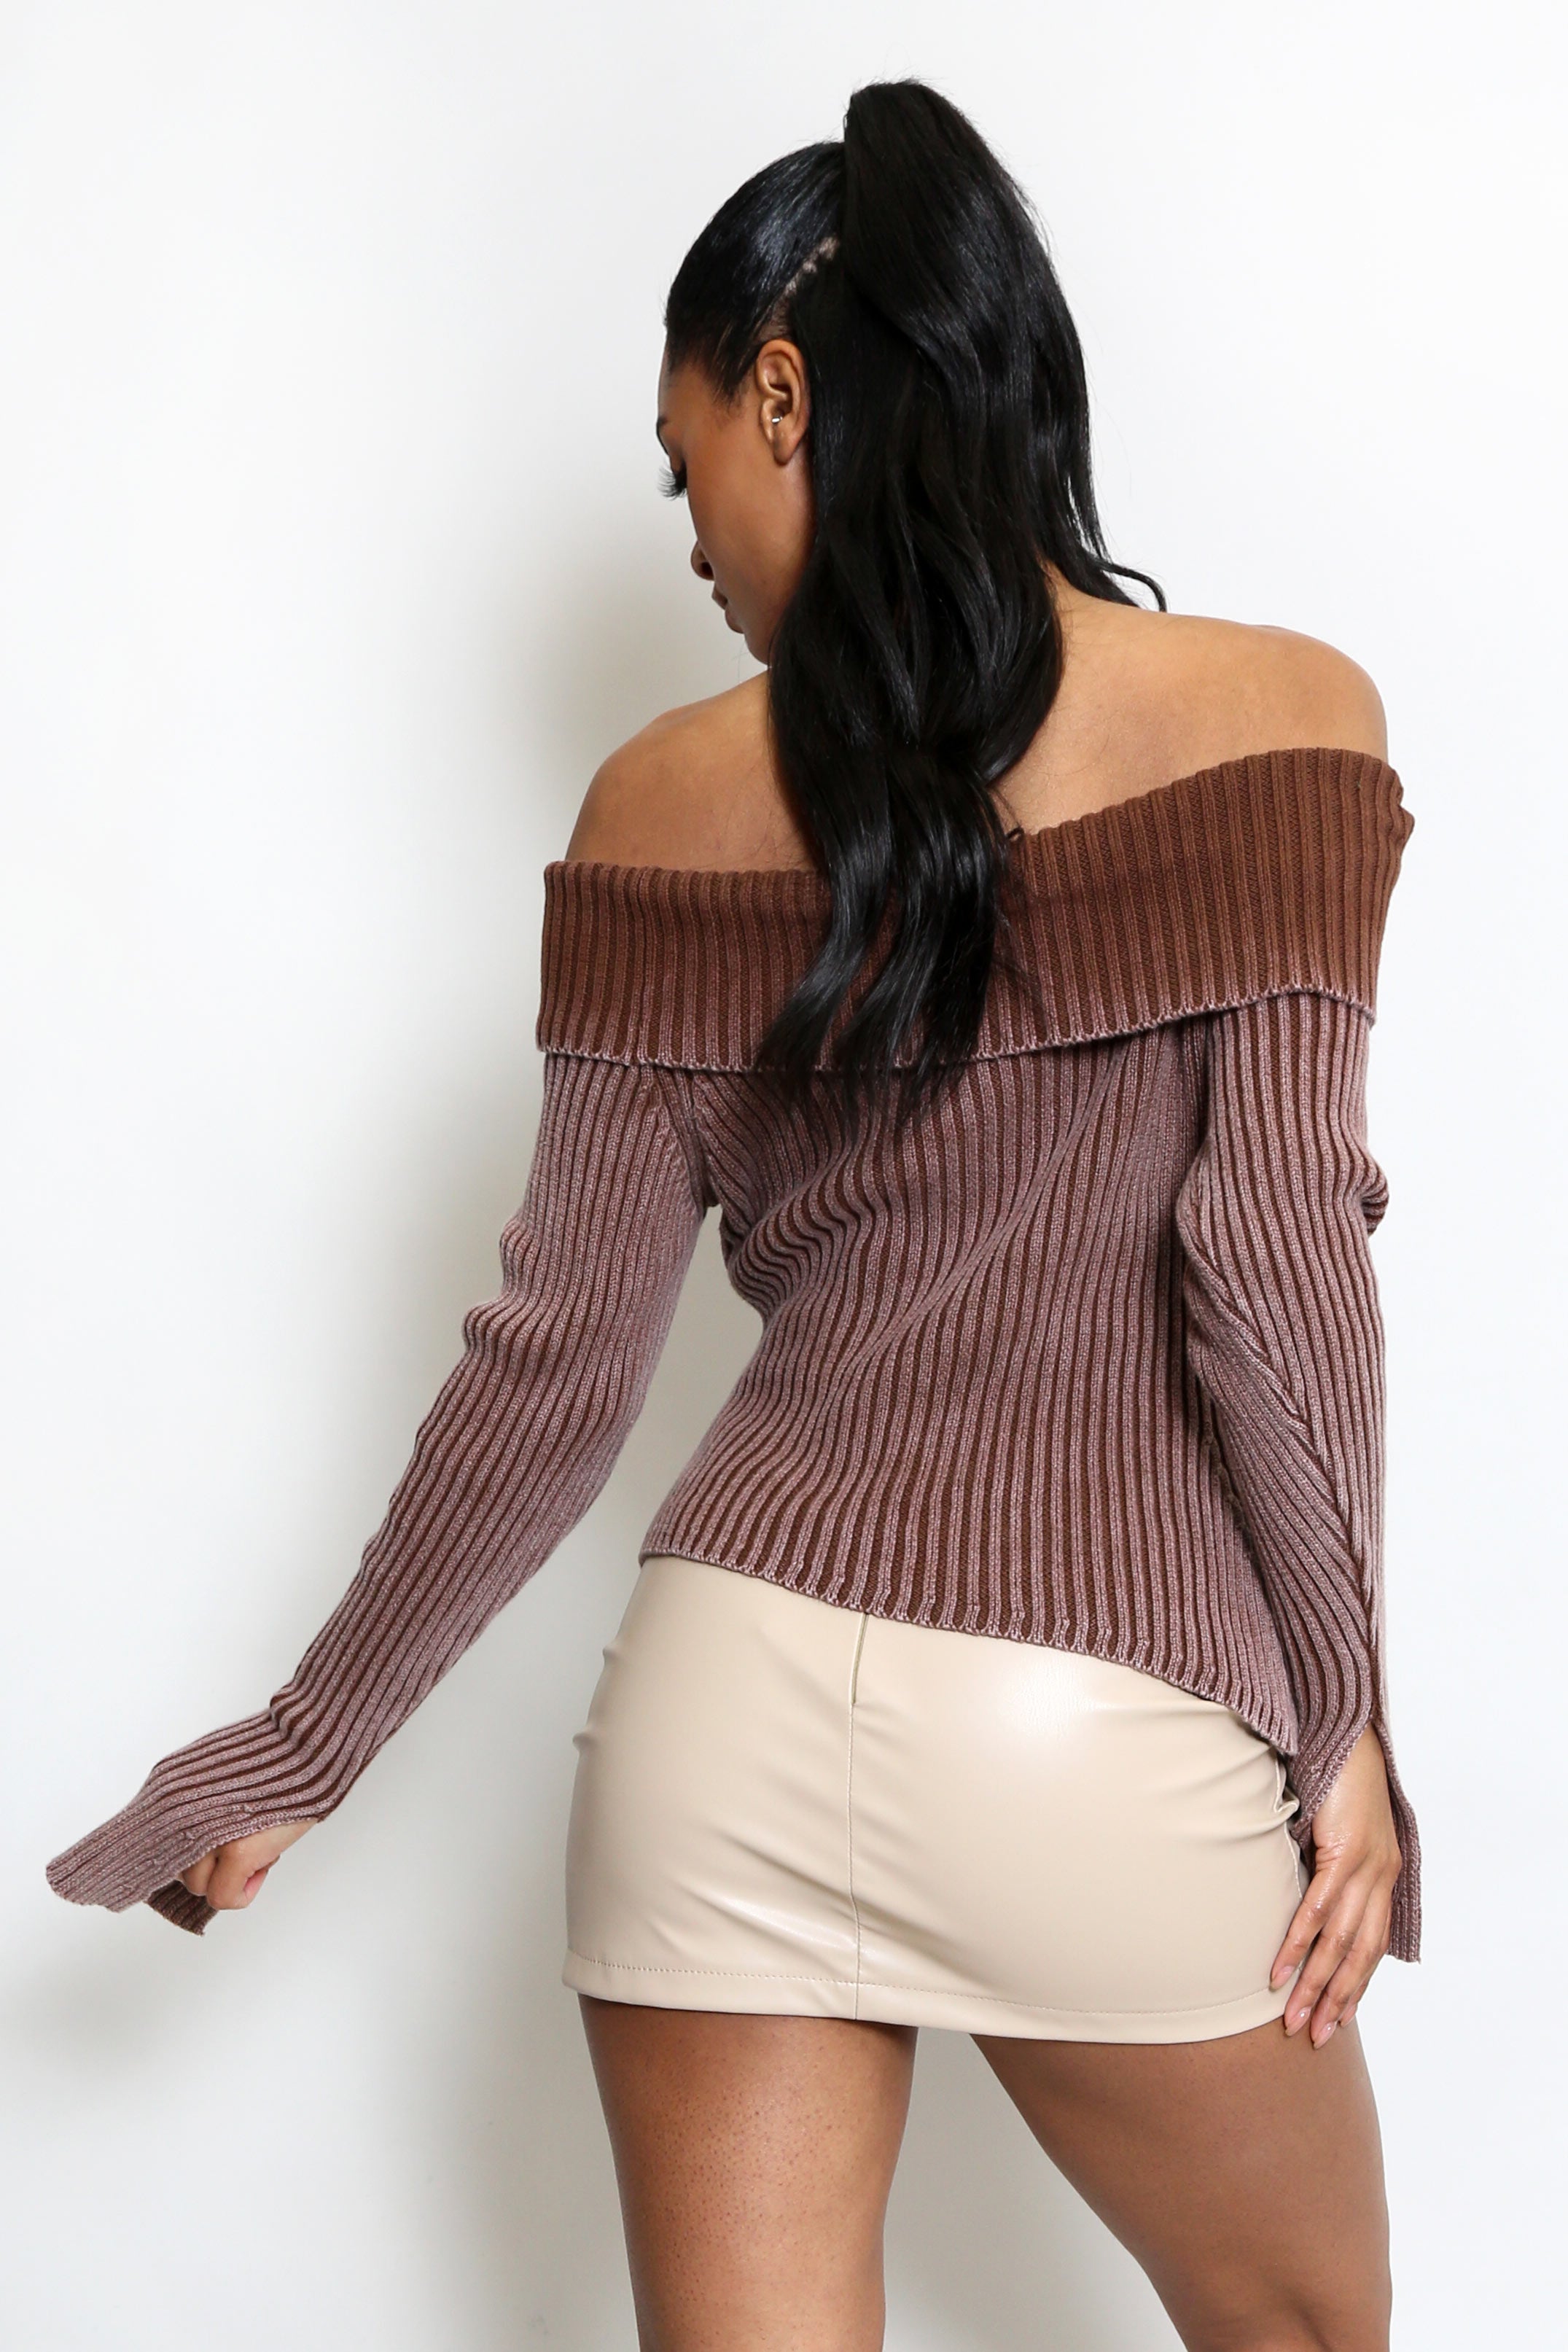 Ribbed Off The Shoulder Asymmetric Hem Knit In Coffee